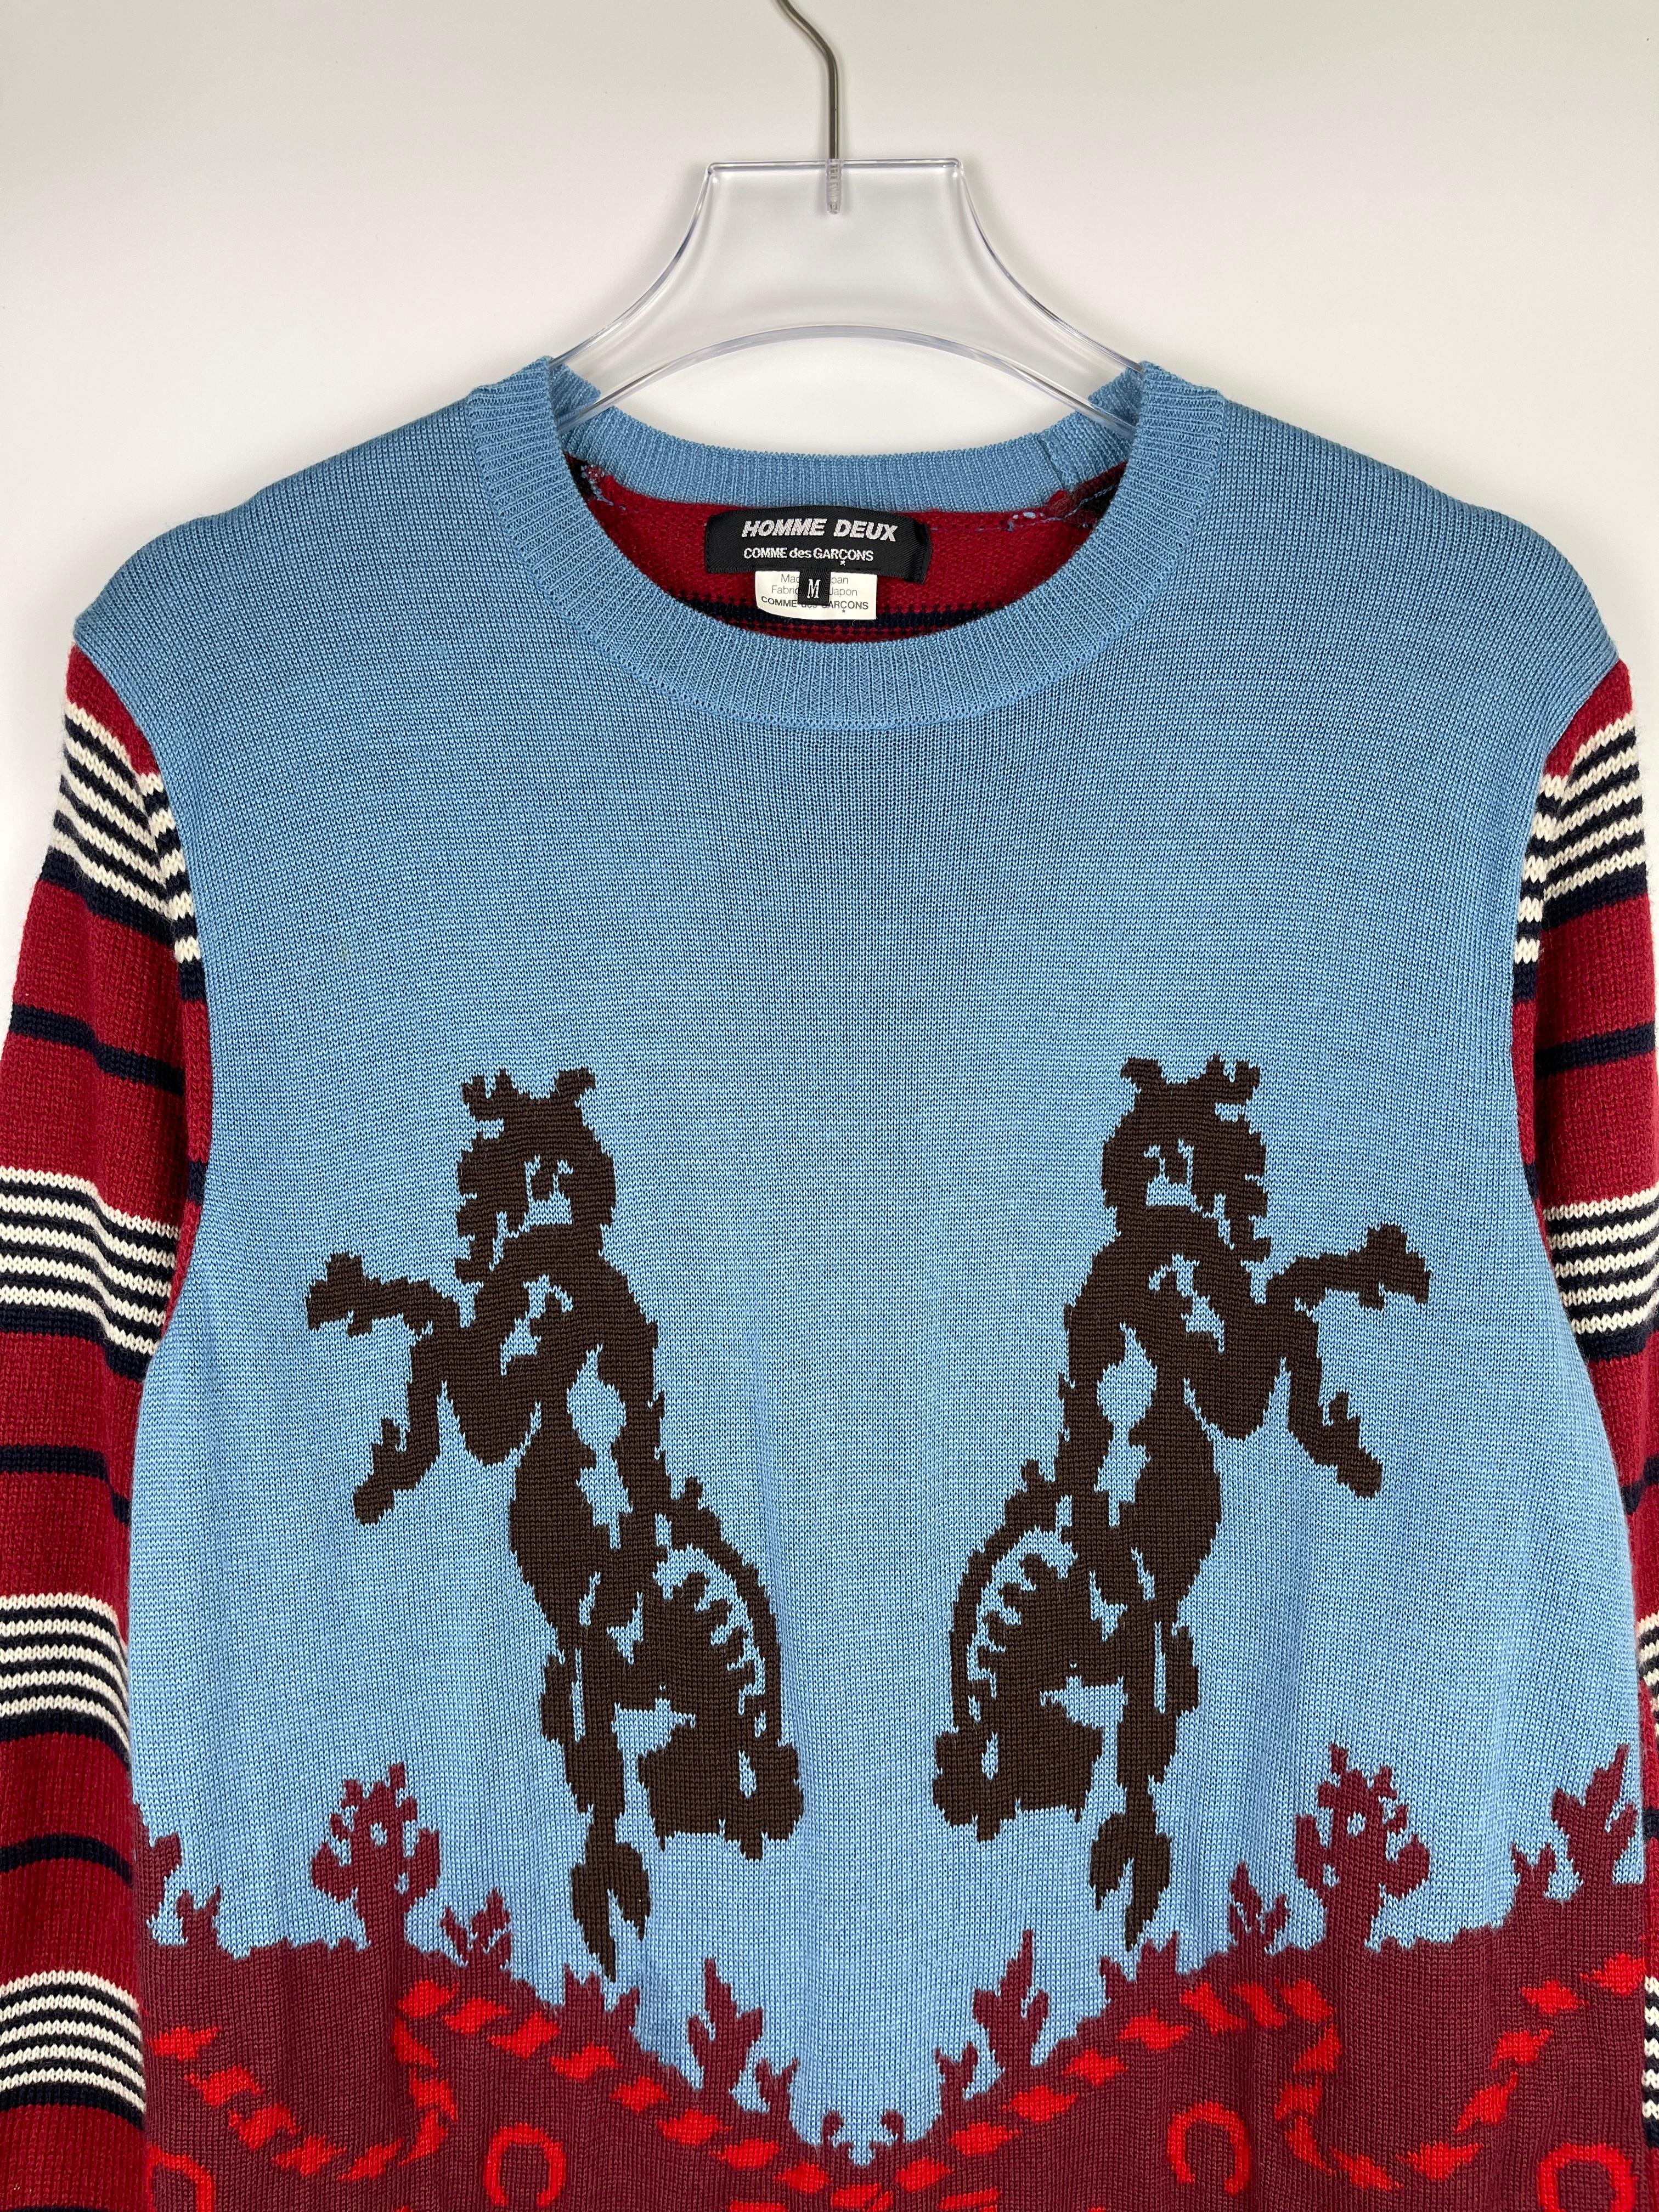 Comme des Garcons Homme Deux A/W2012 Abstract Cavalier Sweater  For Sale 2